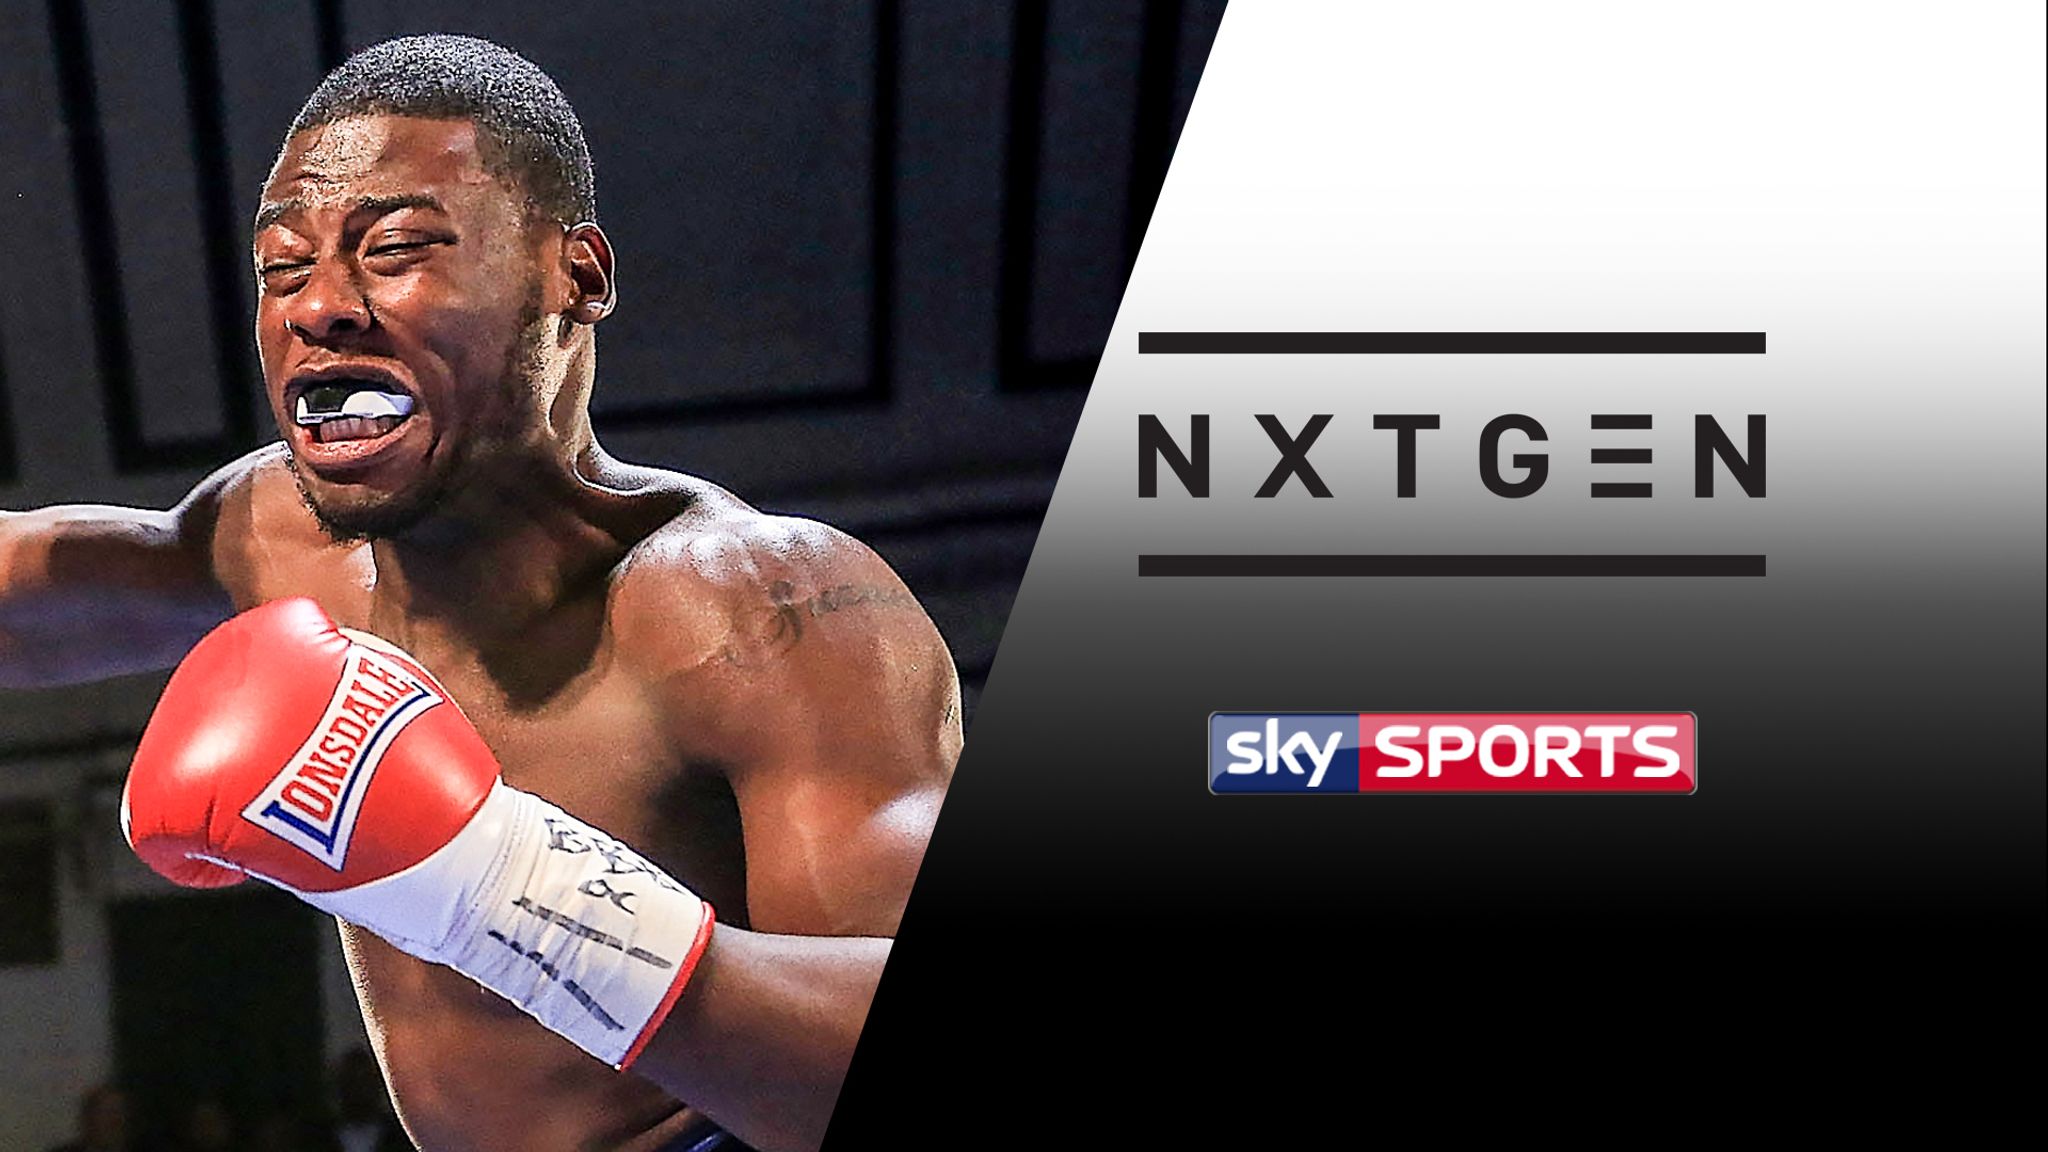 NXTGEN Watch five fights on our live stream and Facebook ahead of Sky Sports 1 show Boxing News Sky Sports